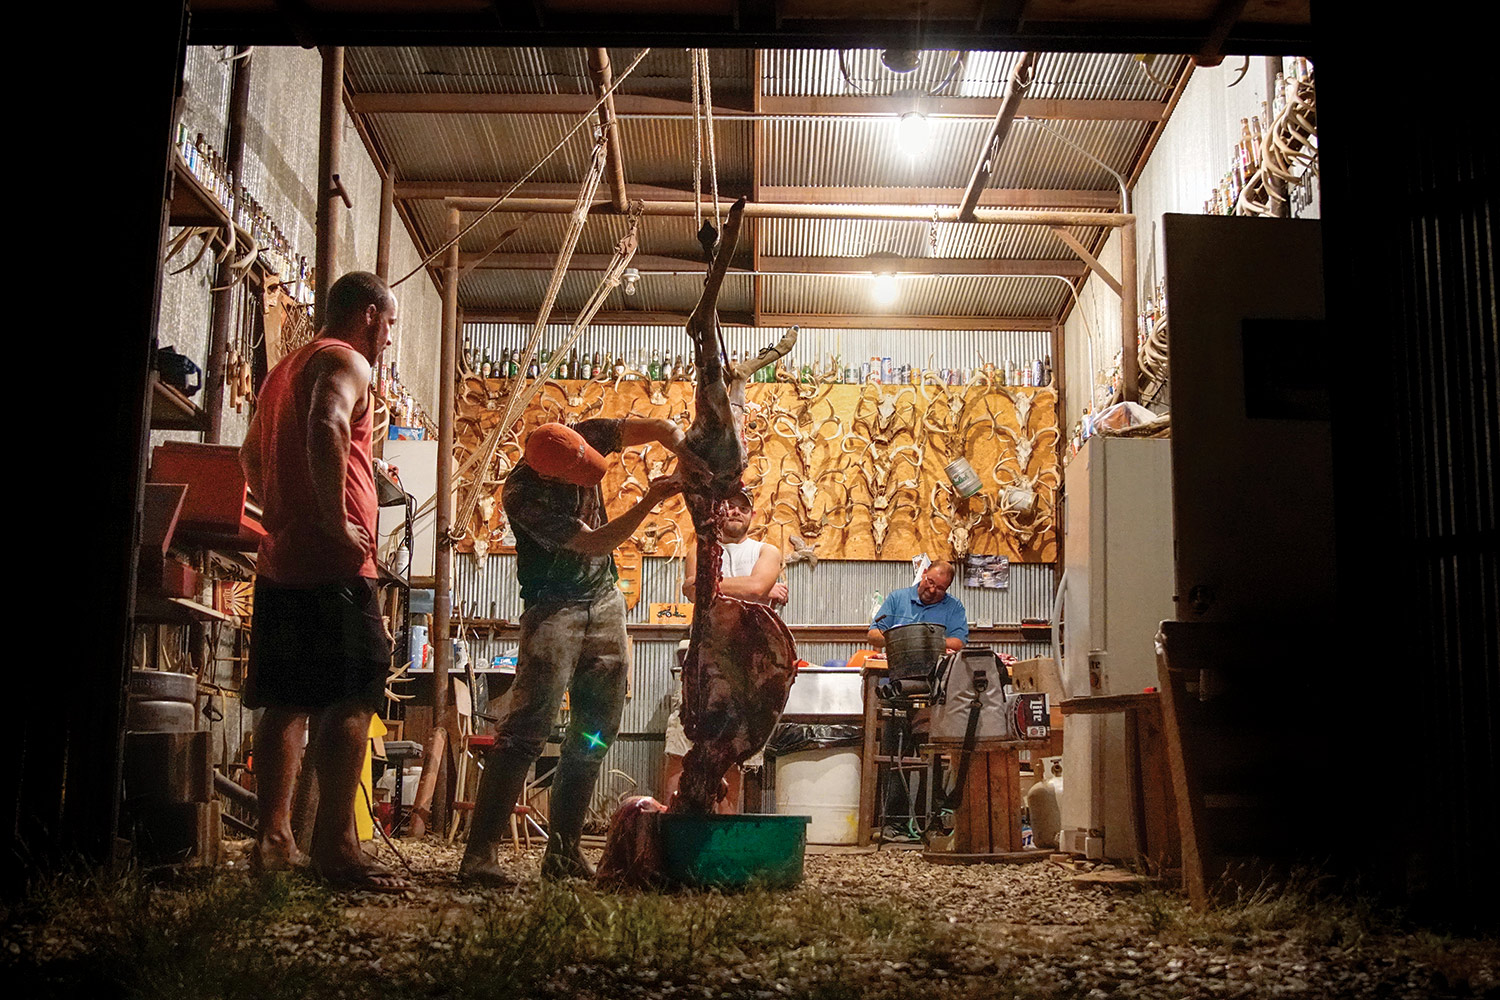 hunters gather in large shed to skin deer hanging from above; walls covered with deer antlers